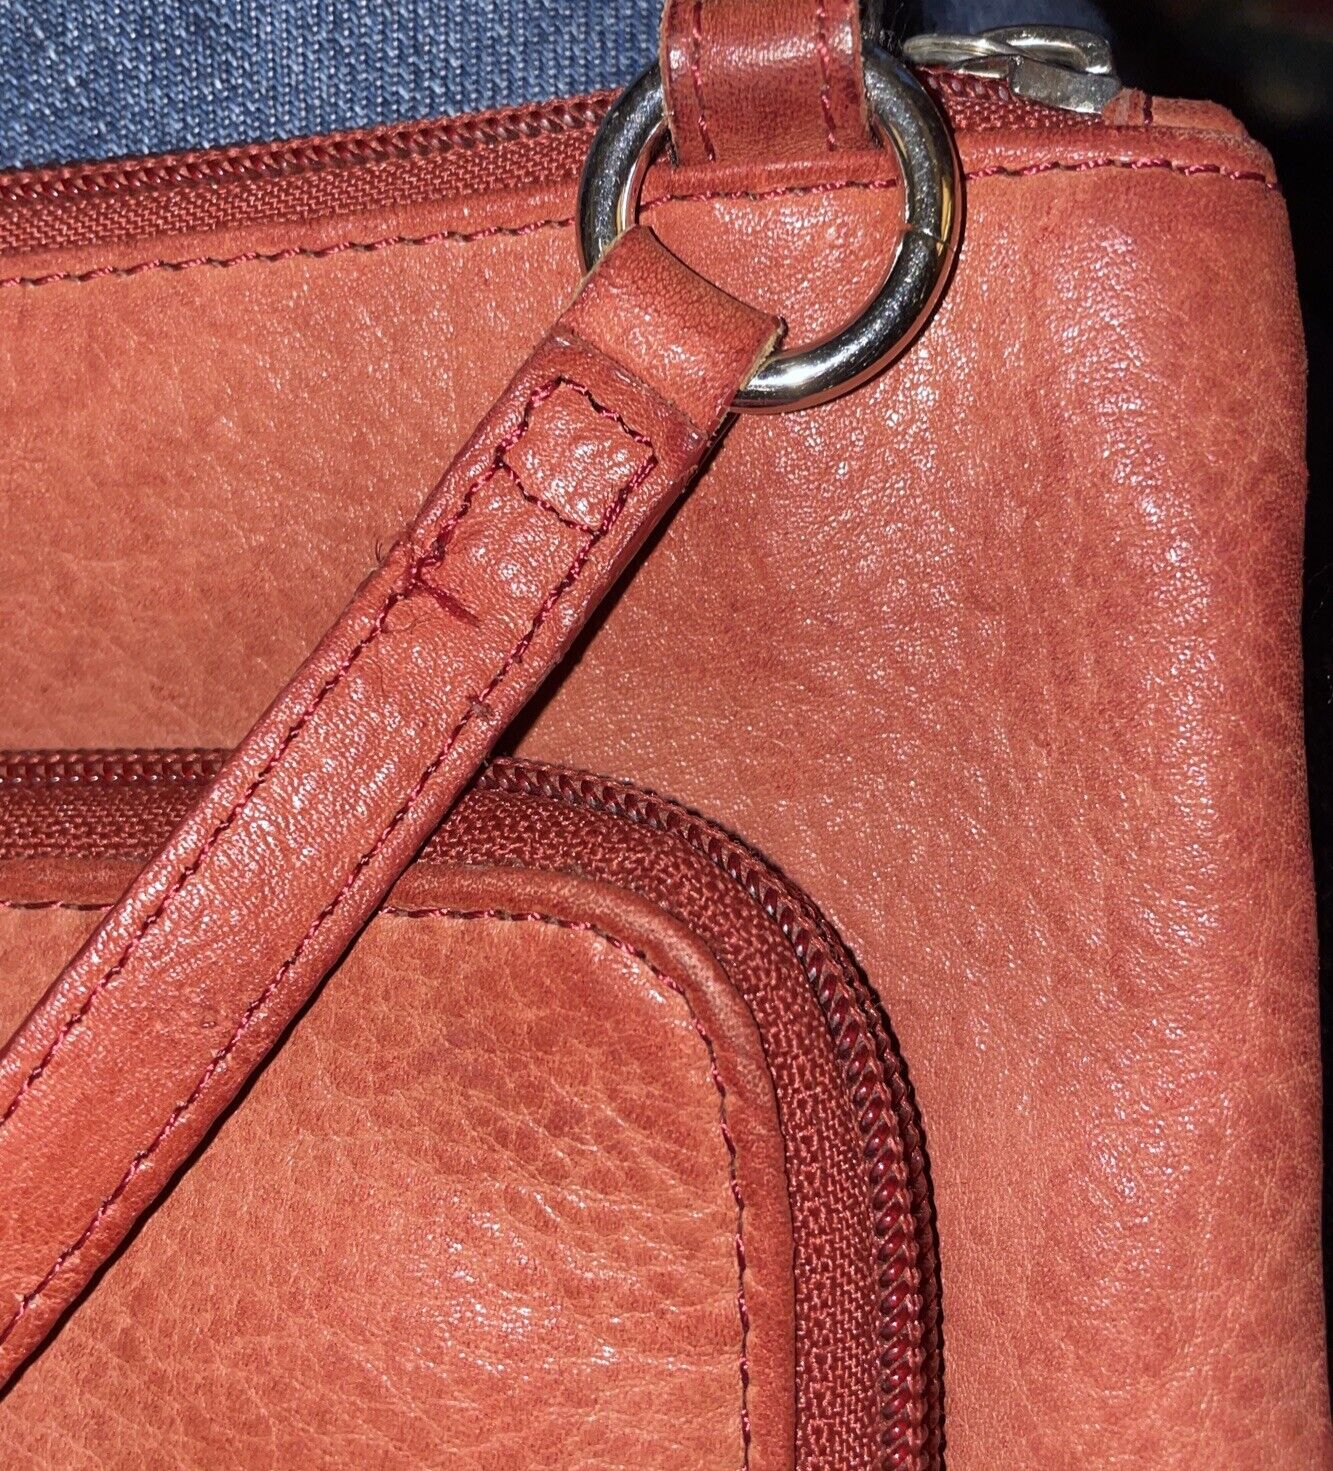 FOSSIL Leather Purse Crossbody Red Long Handle Zi… - image 6